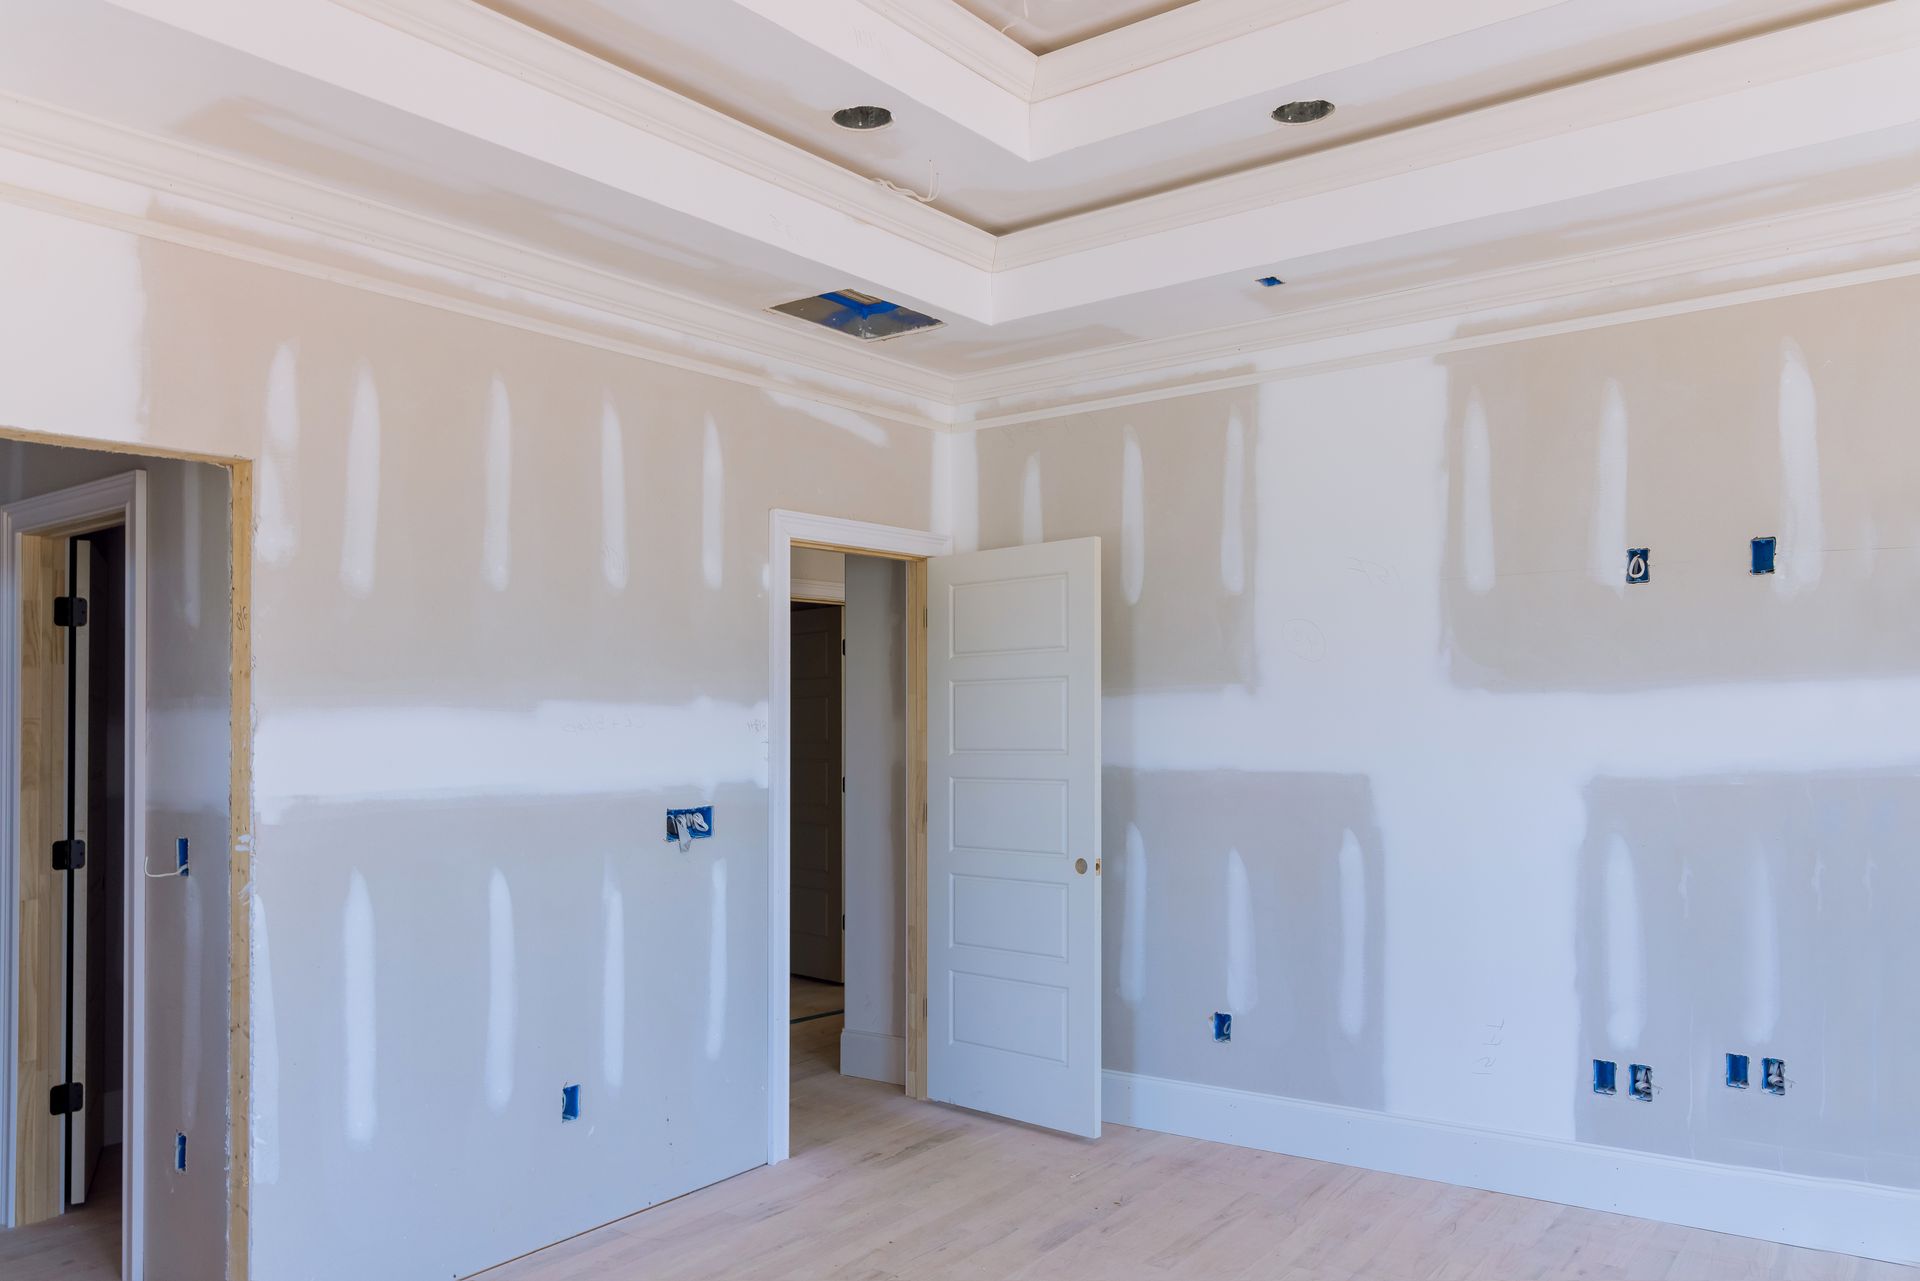 Laid plastering gypsum on the walls and ceiling of a newly built house